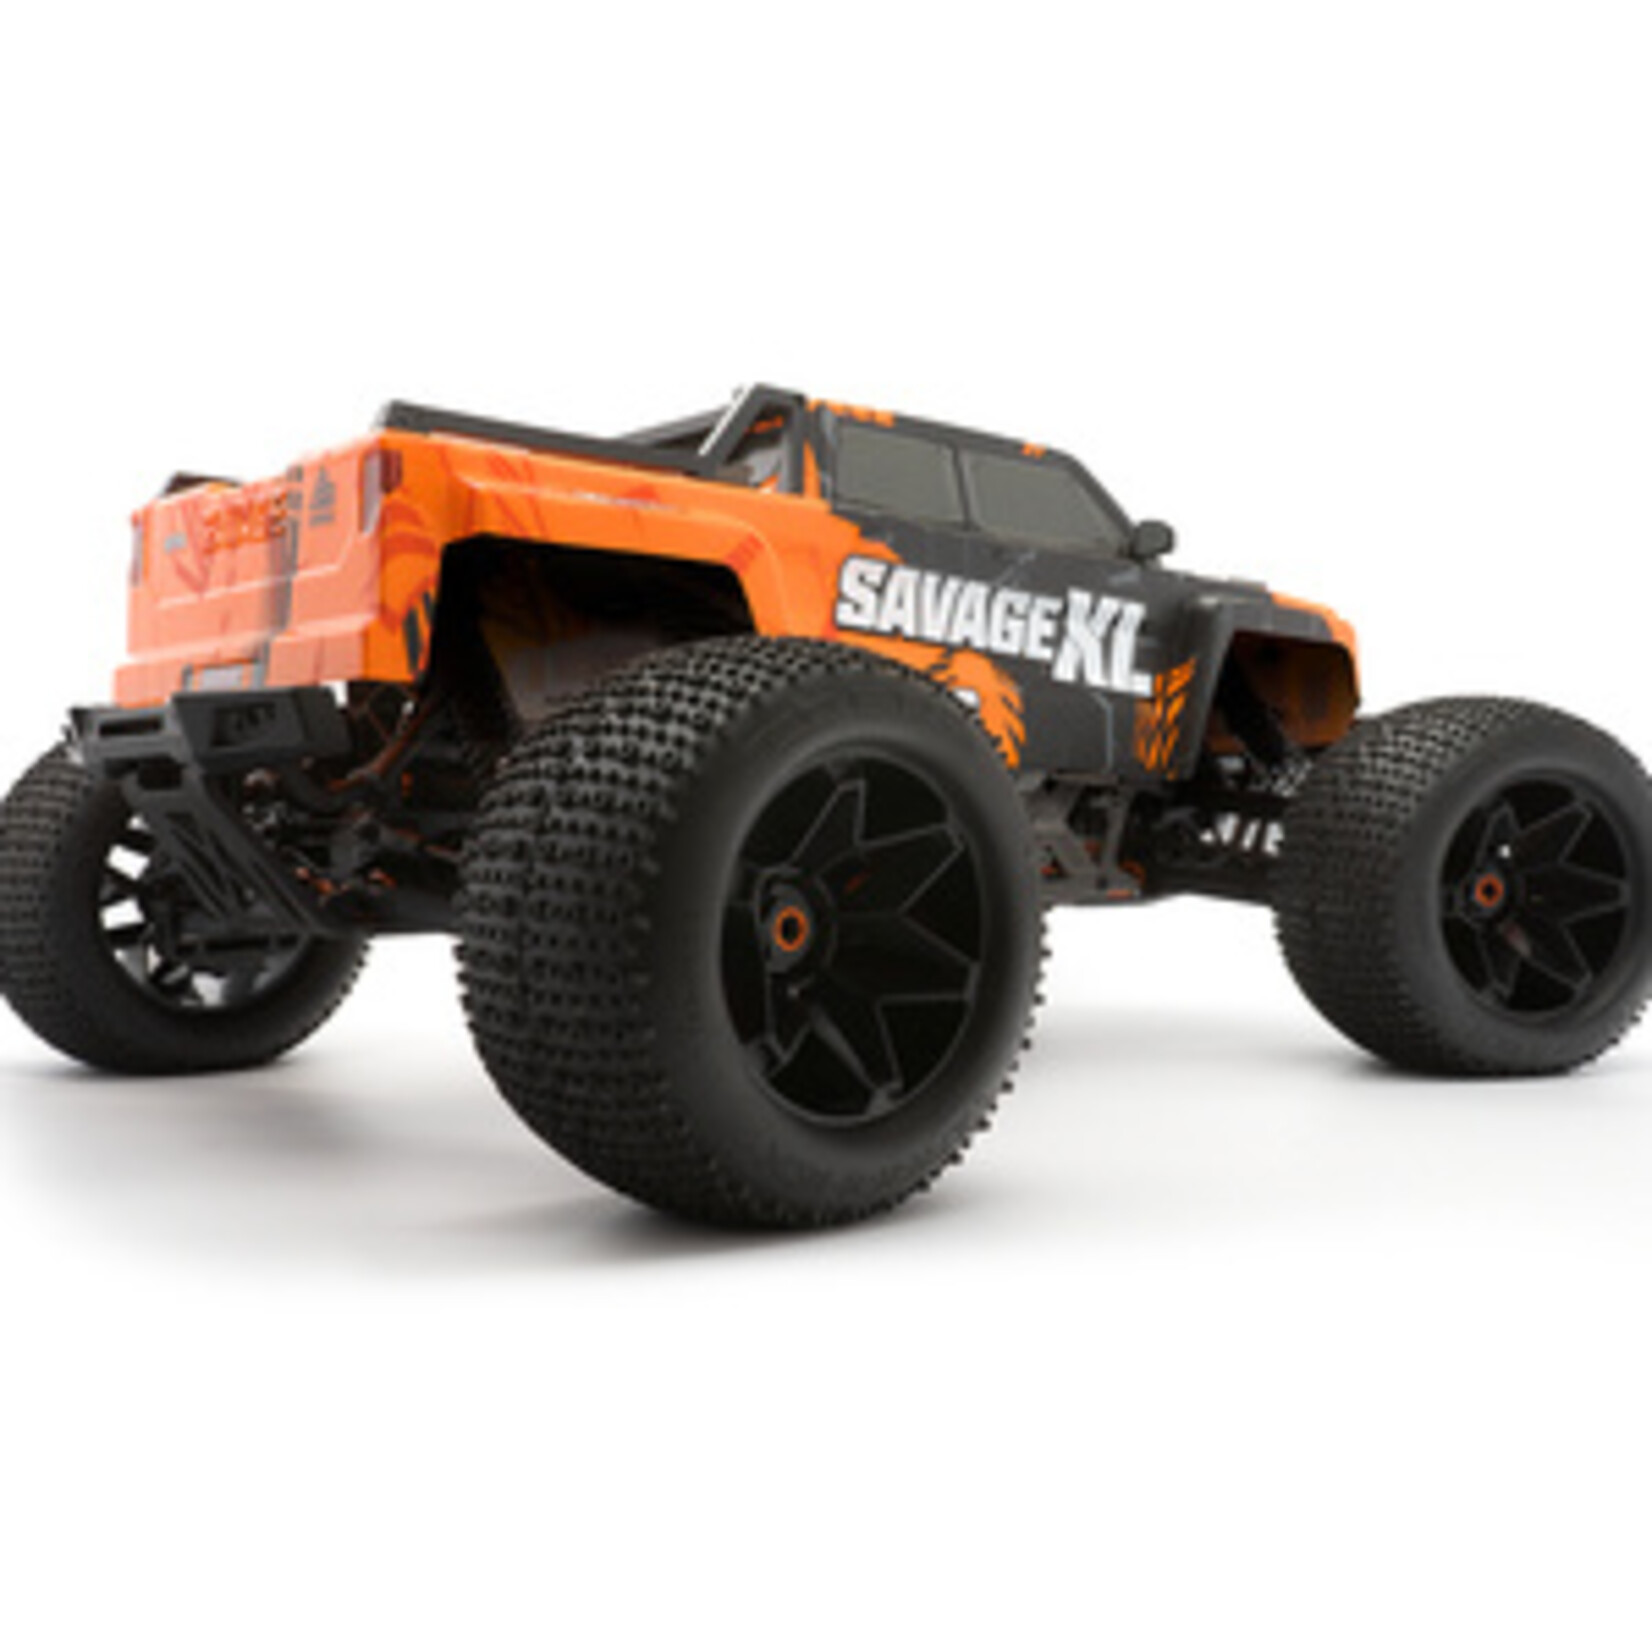 HPI Racing HPI160102  Savage XL 5.9 GTXL-6 Nitro Powered Monster Truck RTR, 1/8 scale, 4WD, 2.4GHz Radio System